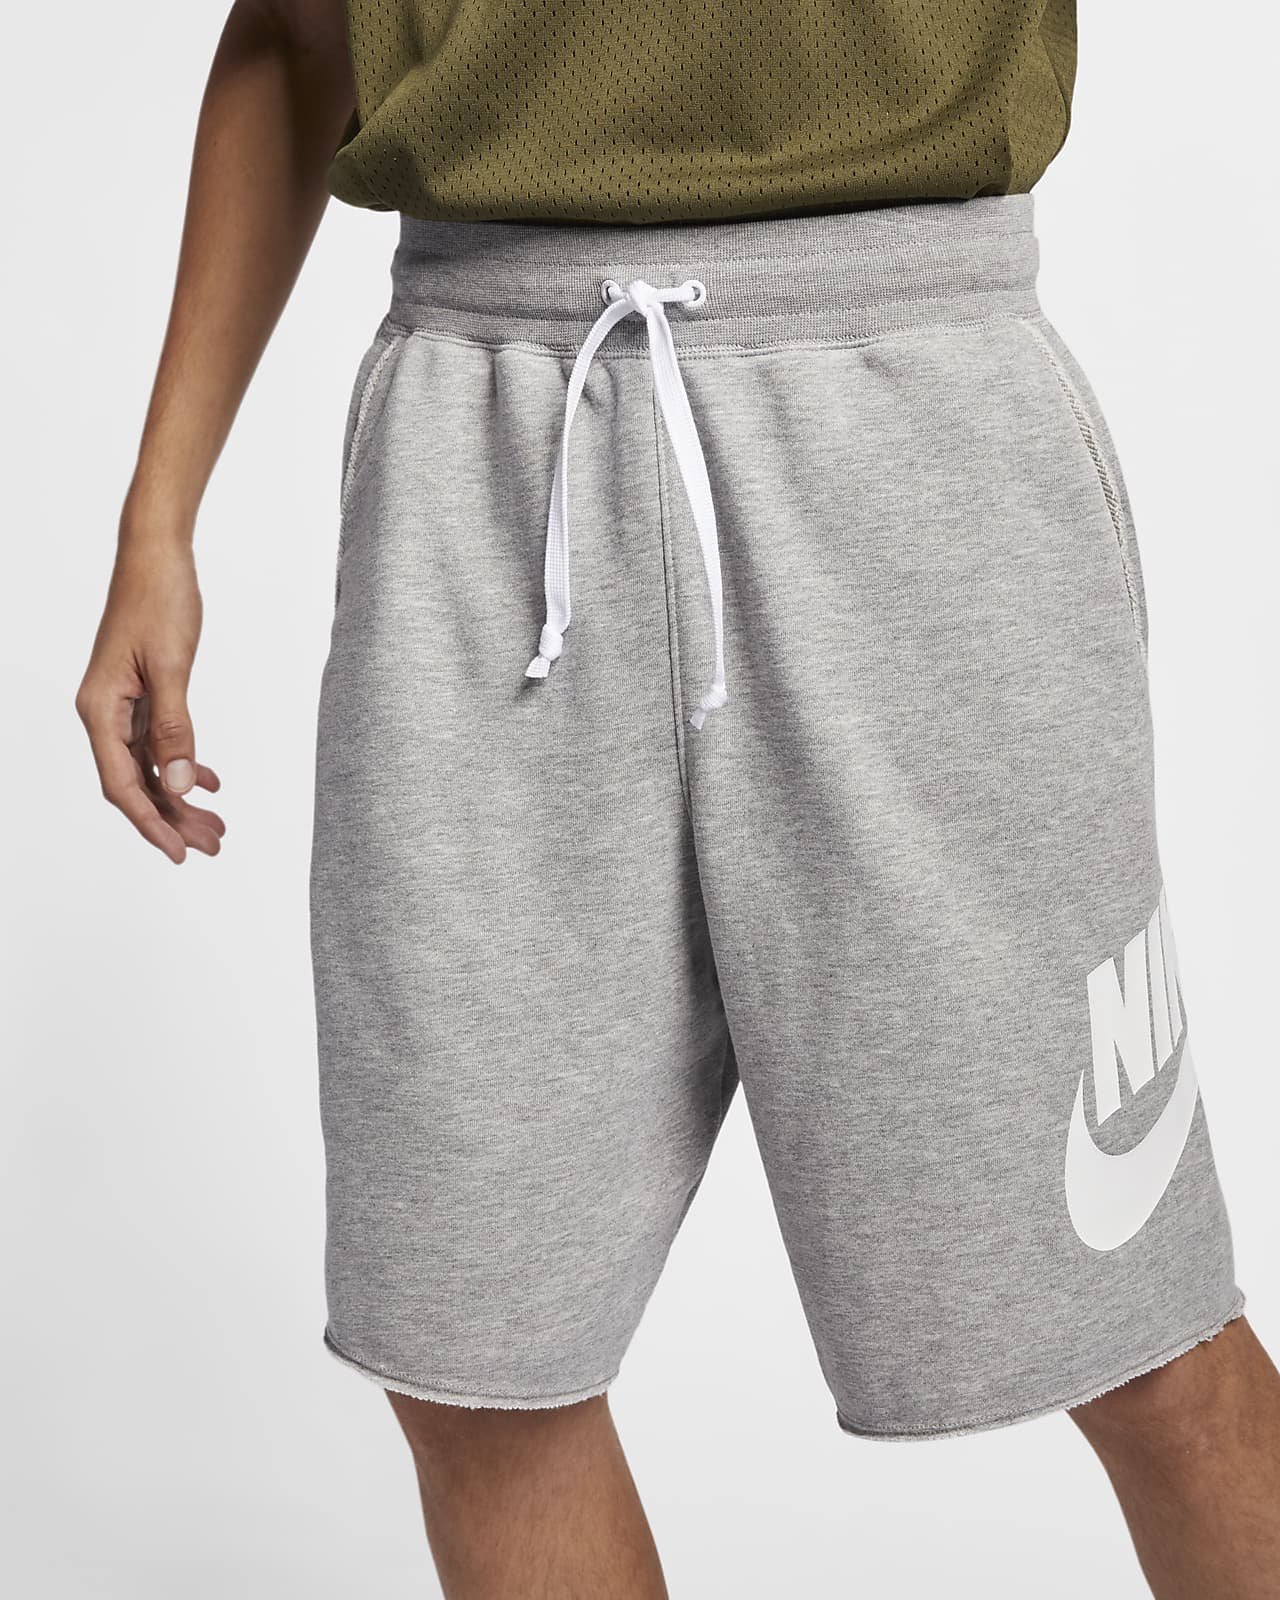 French Terry Shorts. Nike HR